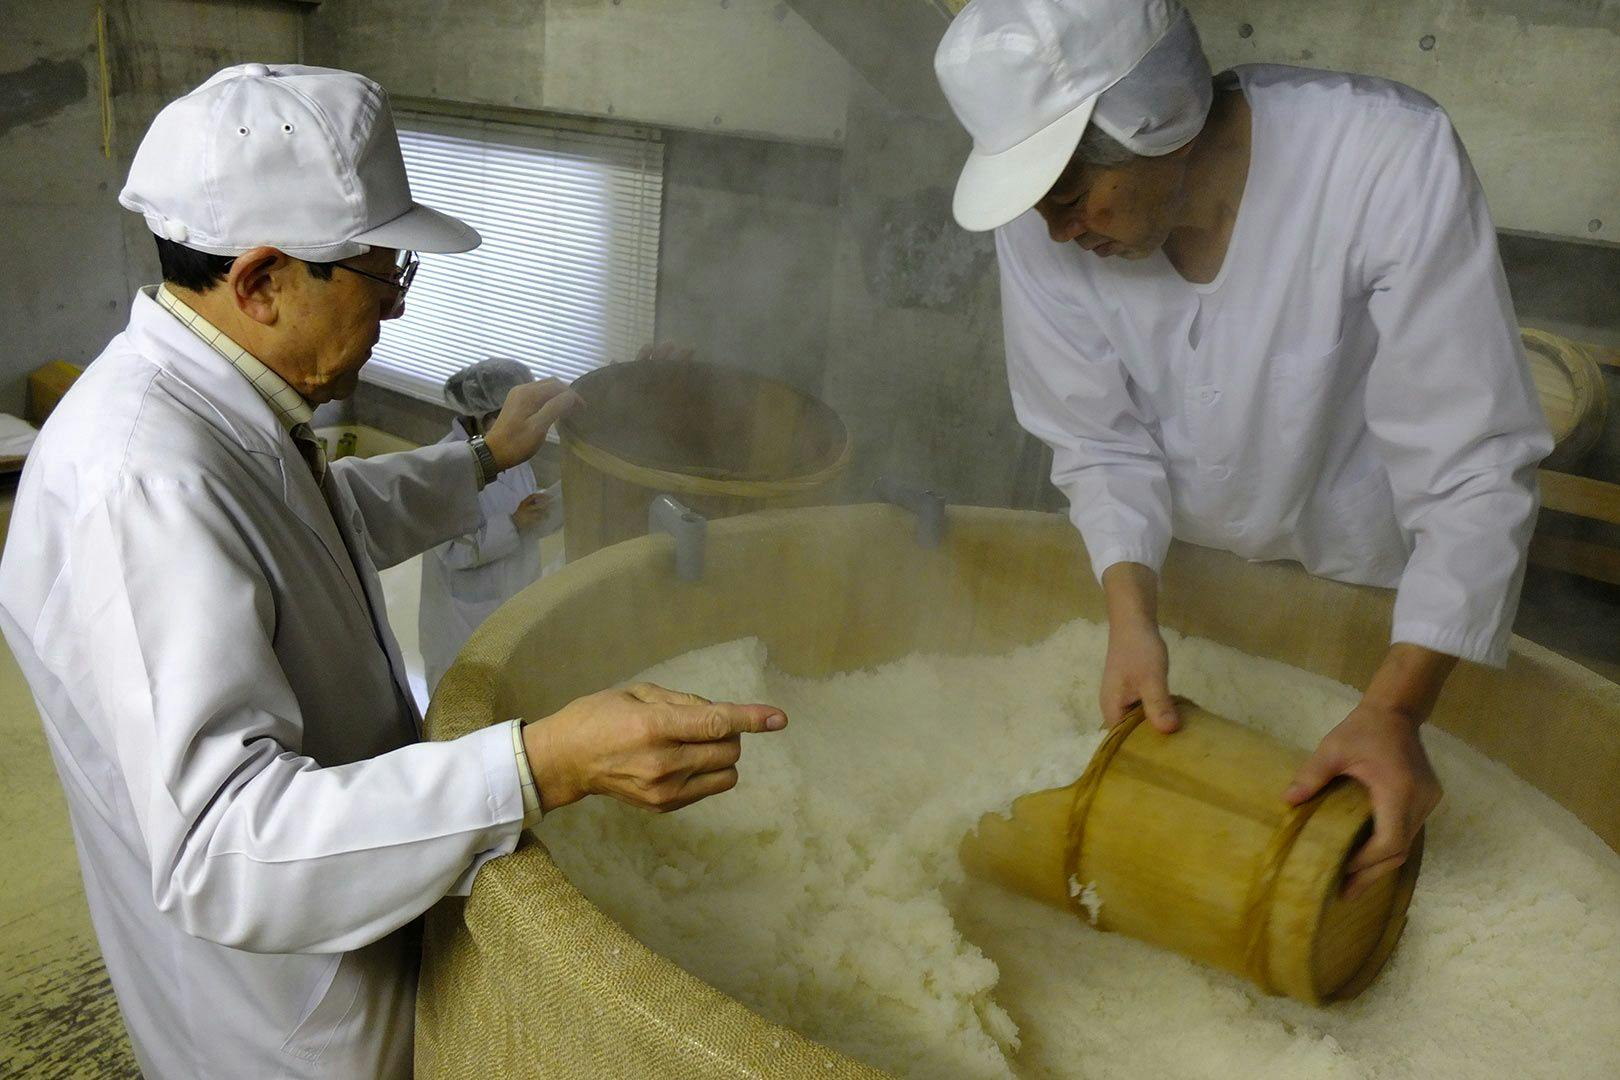 A toji (“brewing master”) examines the rice during the brewing process.